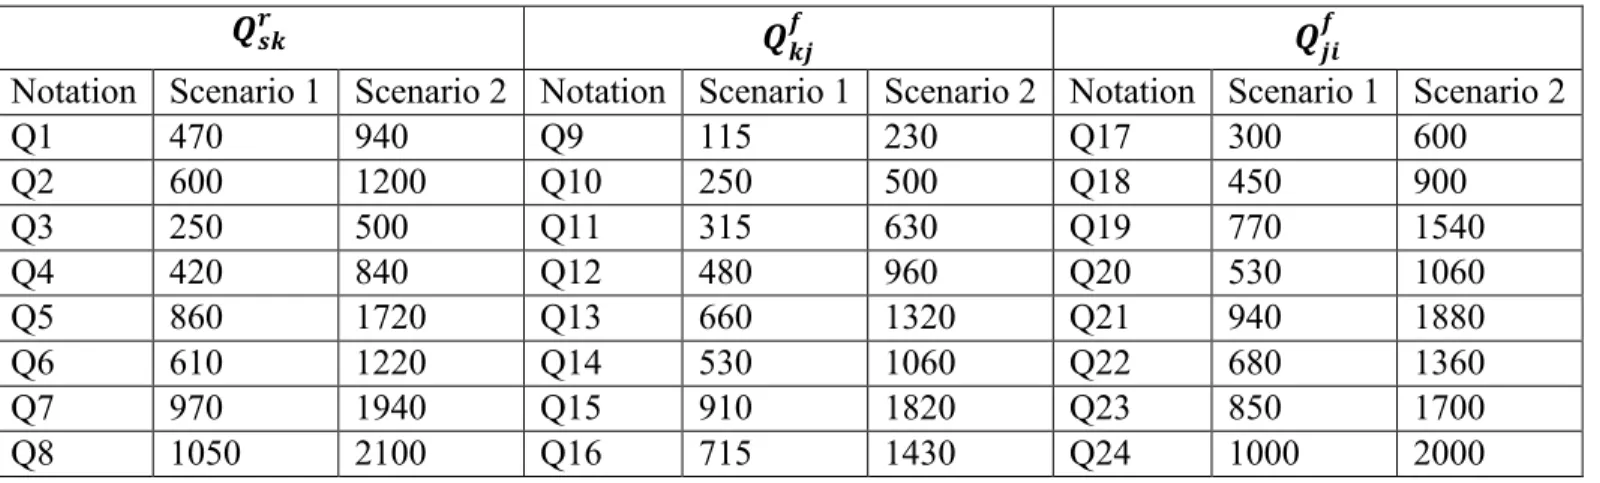 Table 4: Demand of customer i for product f in a particular scenario, b if 